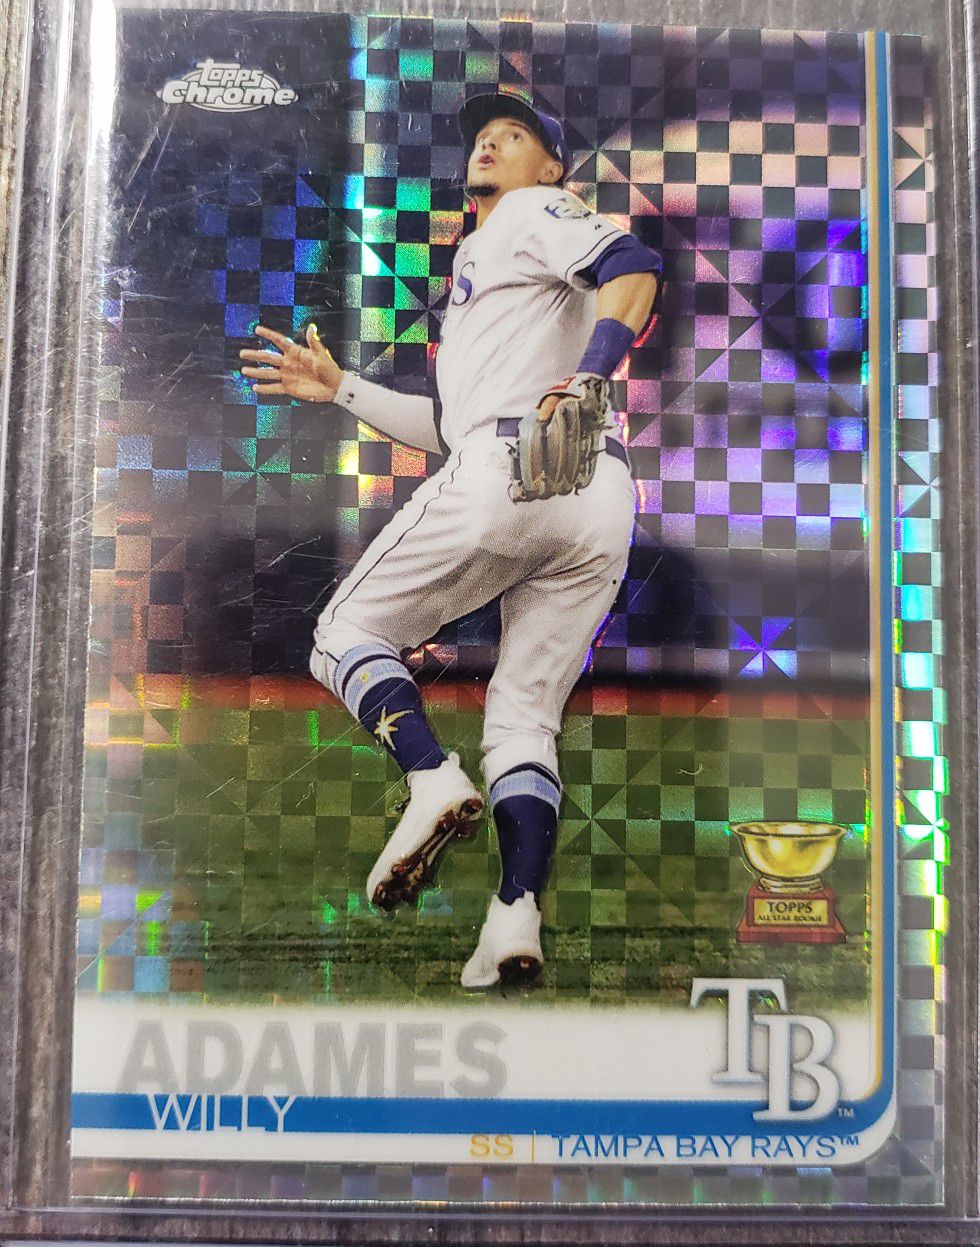 Willy Adames topps rookie cup xfractor card